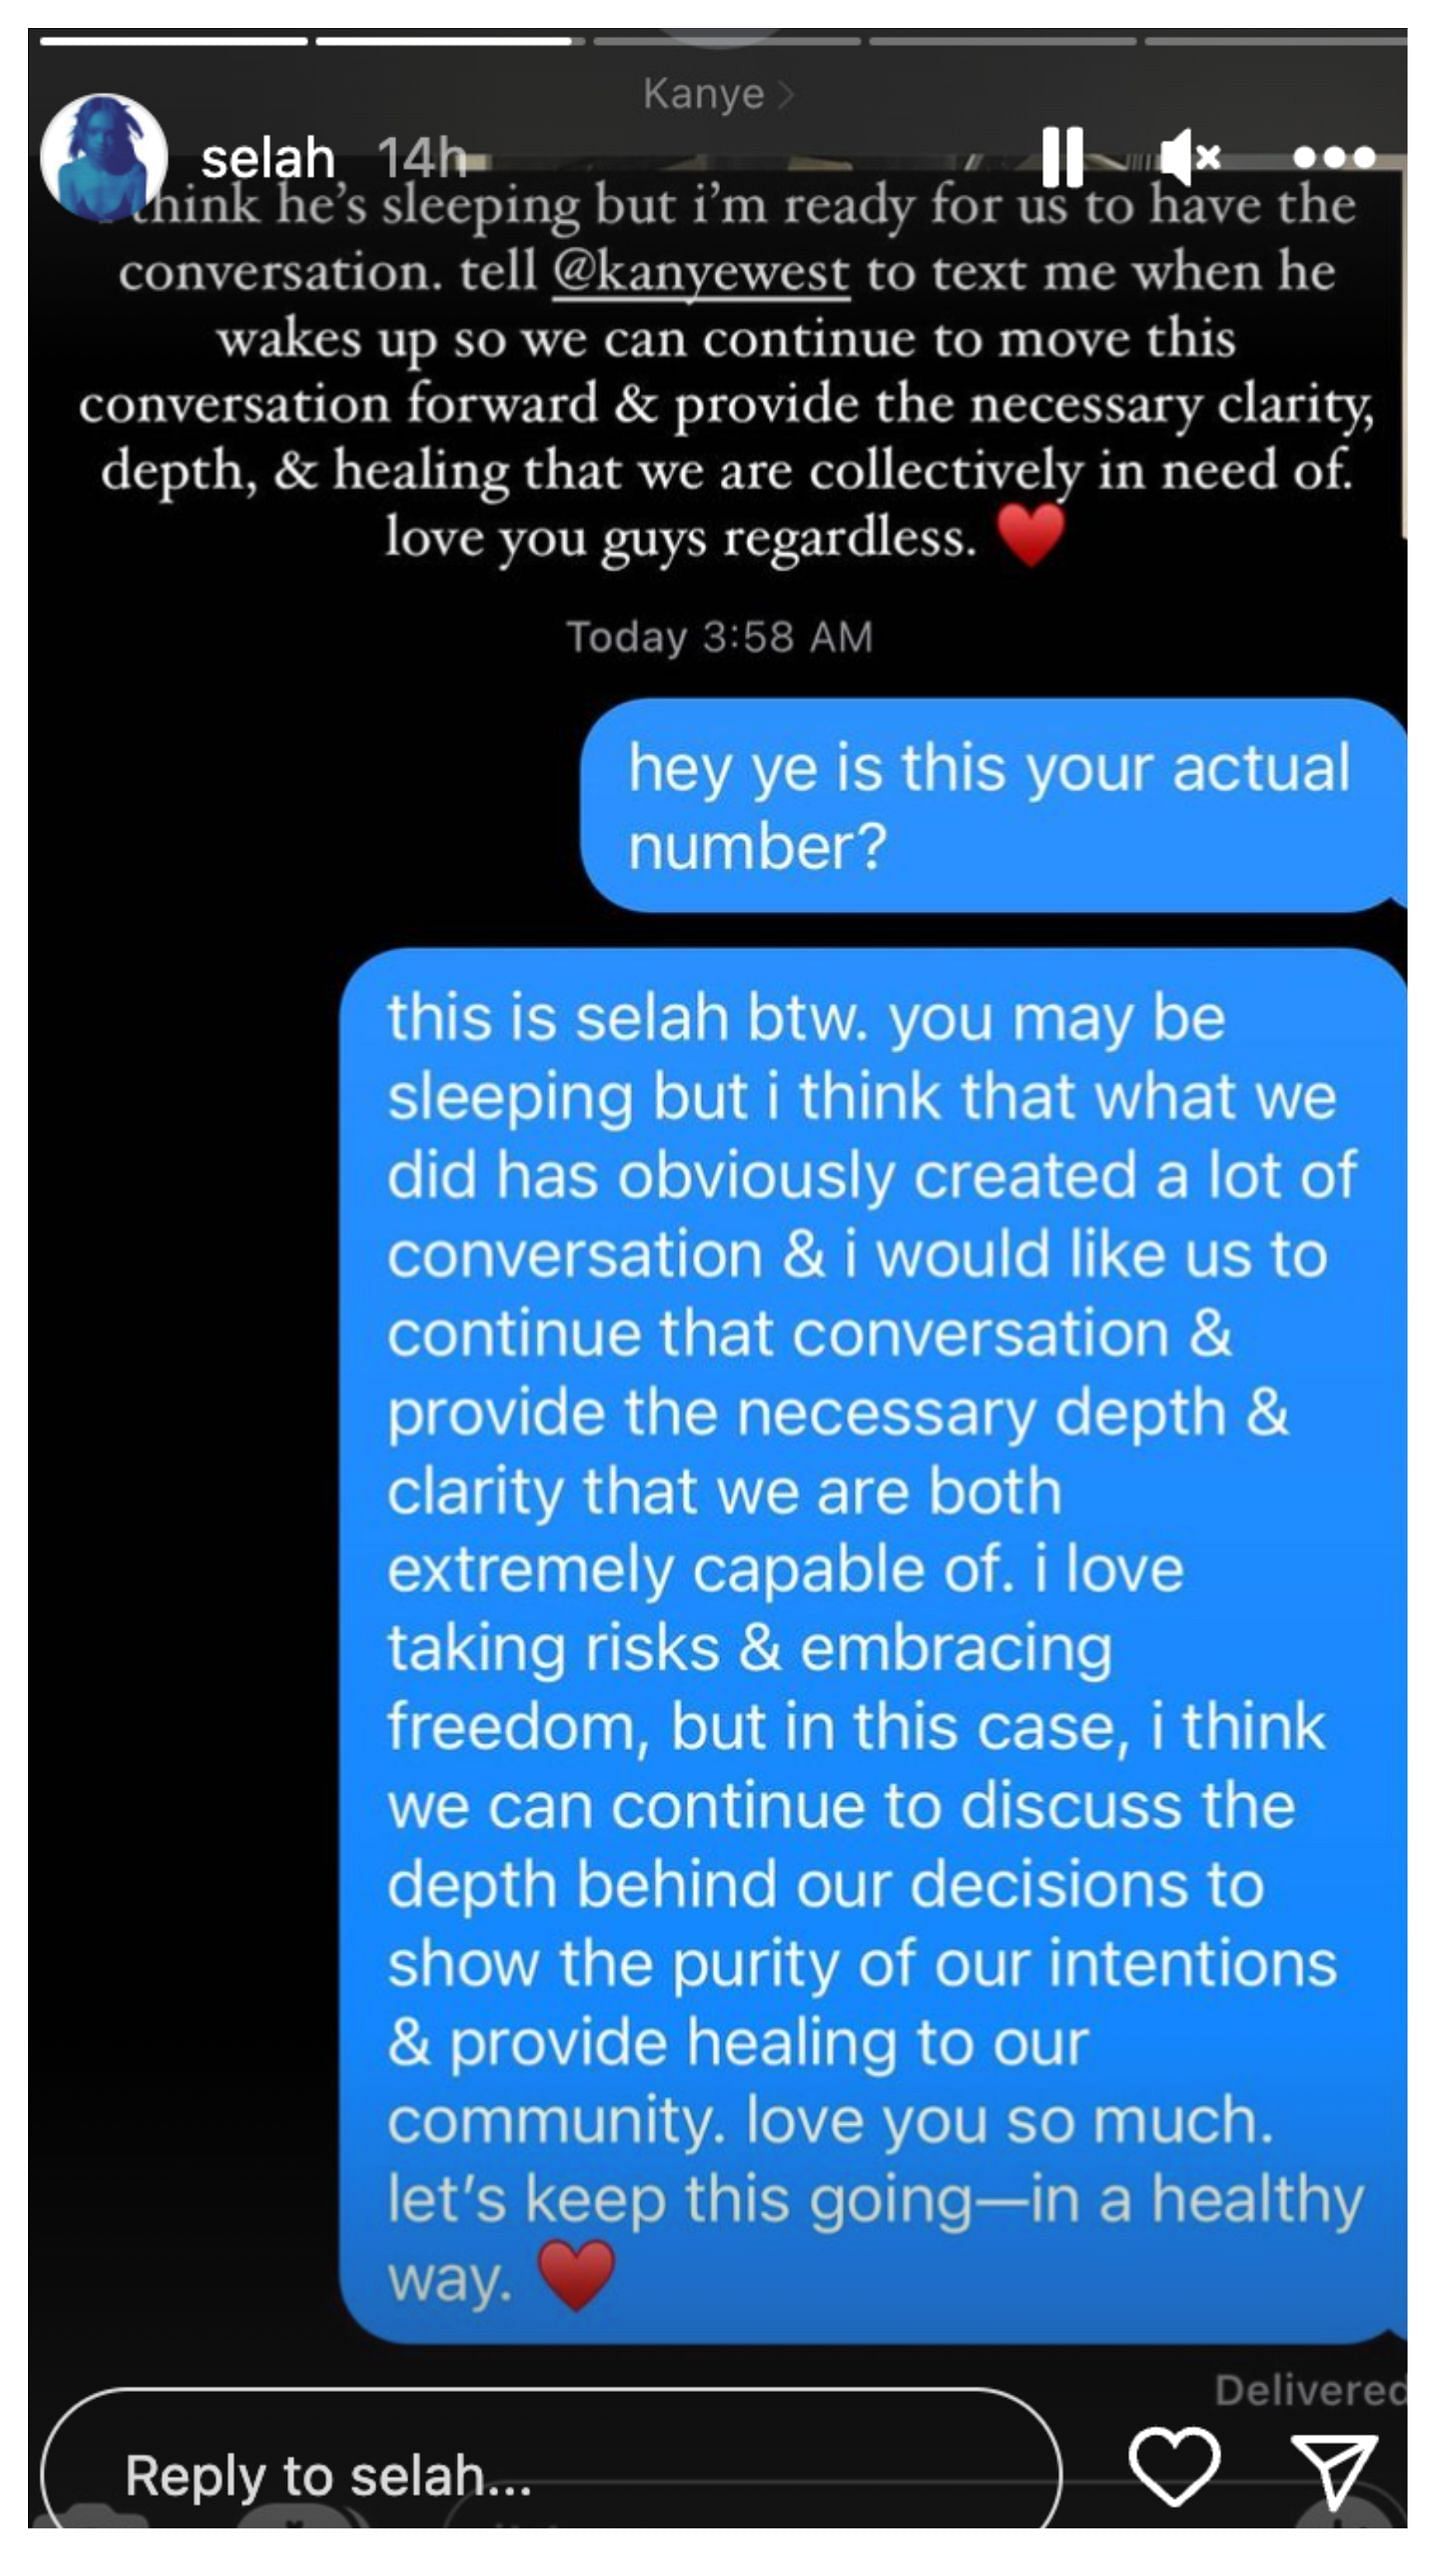 Selah shares her conversation thread with Kanye West. (Image via Instagram)